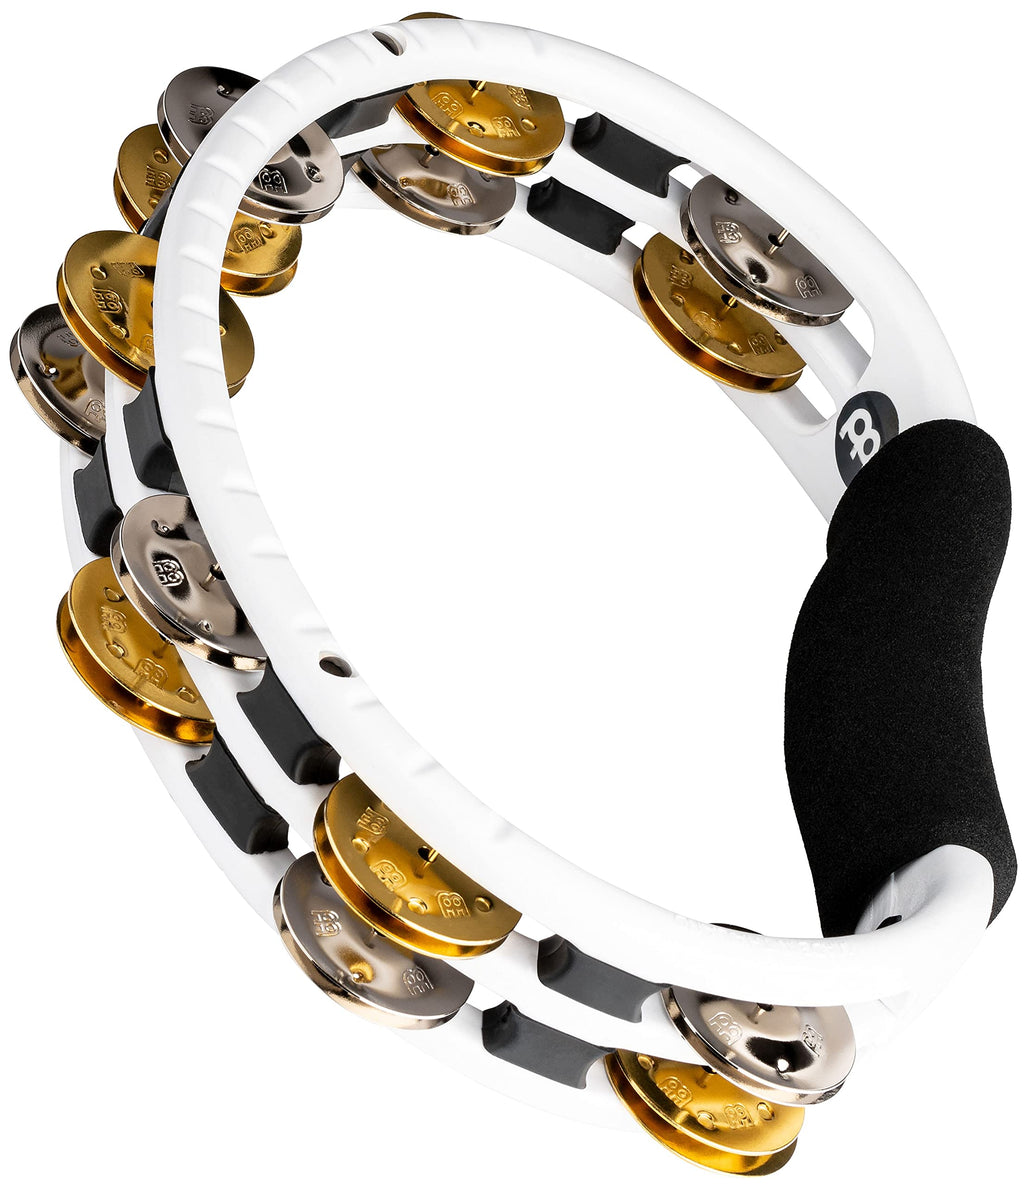 Meinl TMT1MWH Hand Tambourine and Dual Alloy Jingles - White